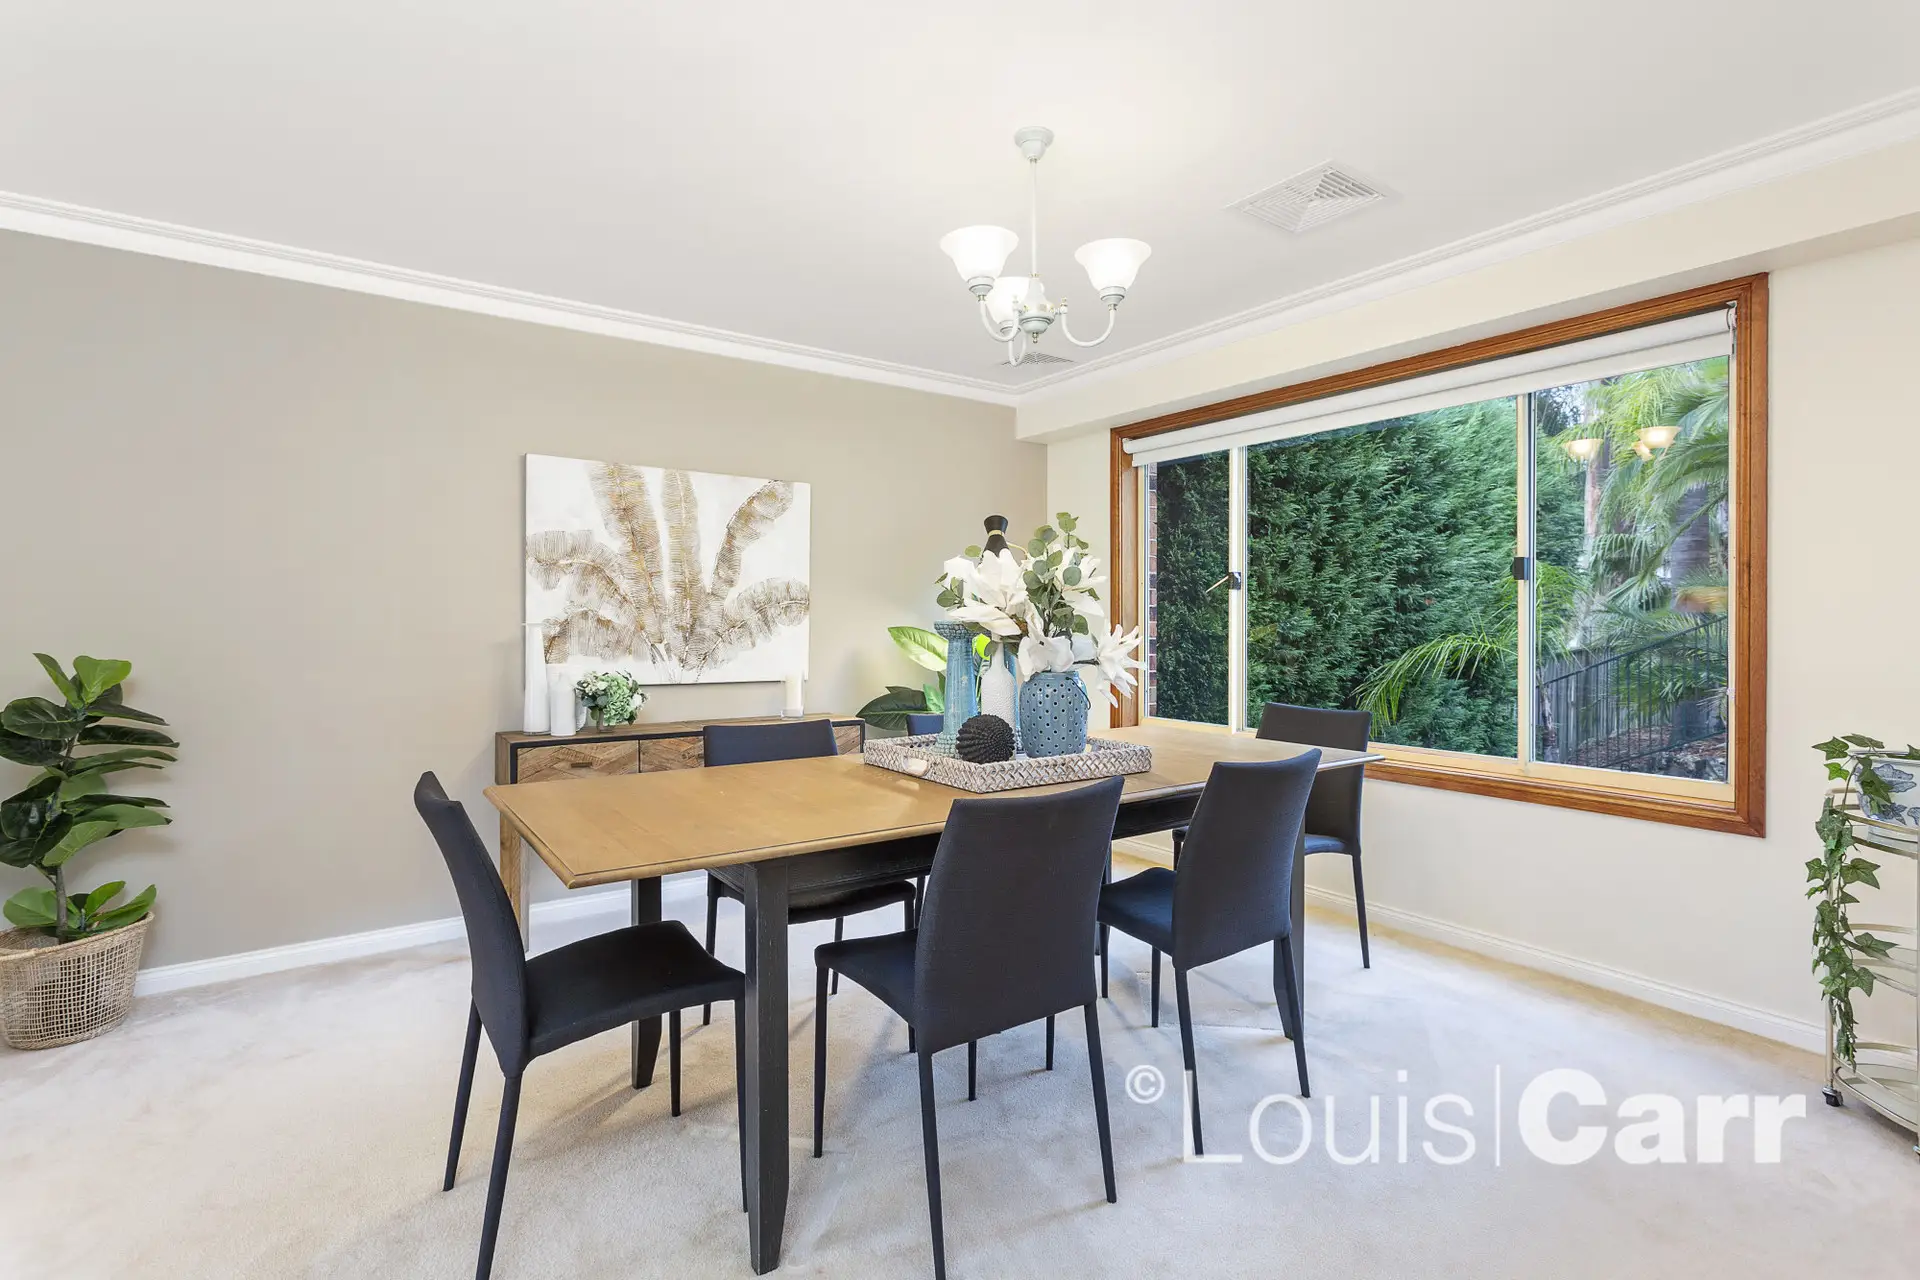 Photo #6: 7 Tambaroora Place, West Pennant Hills - Sold by Louis Carr Real Estate